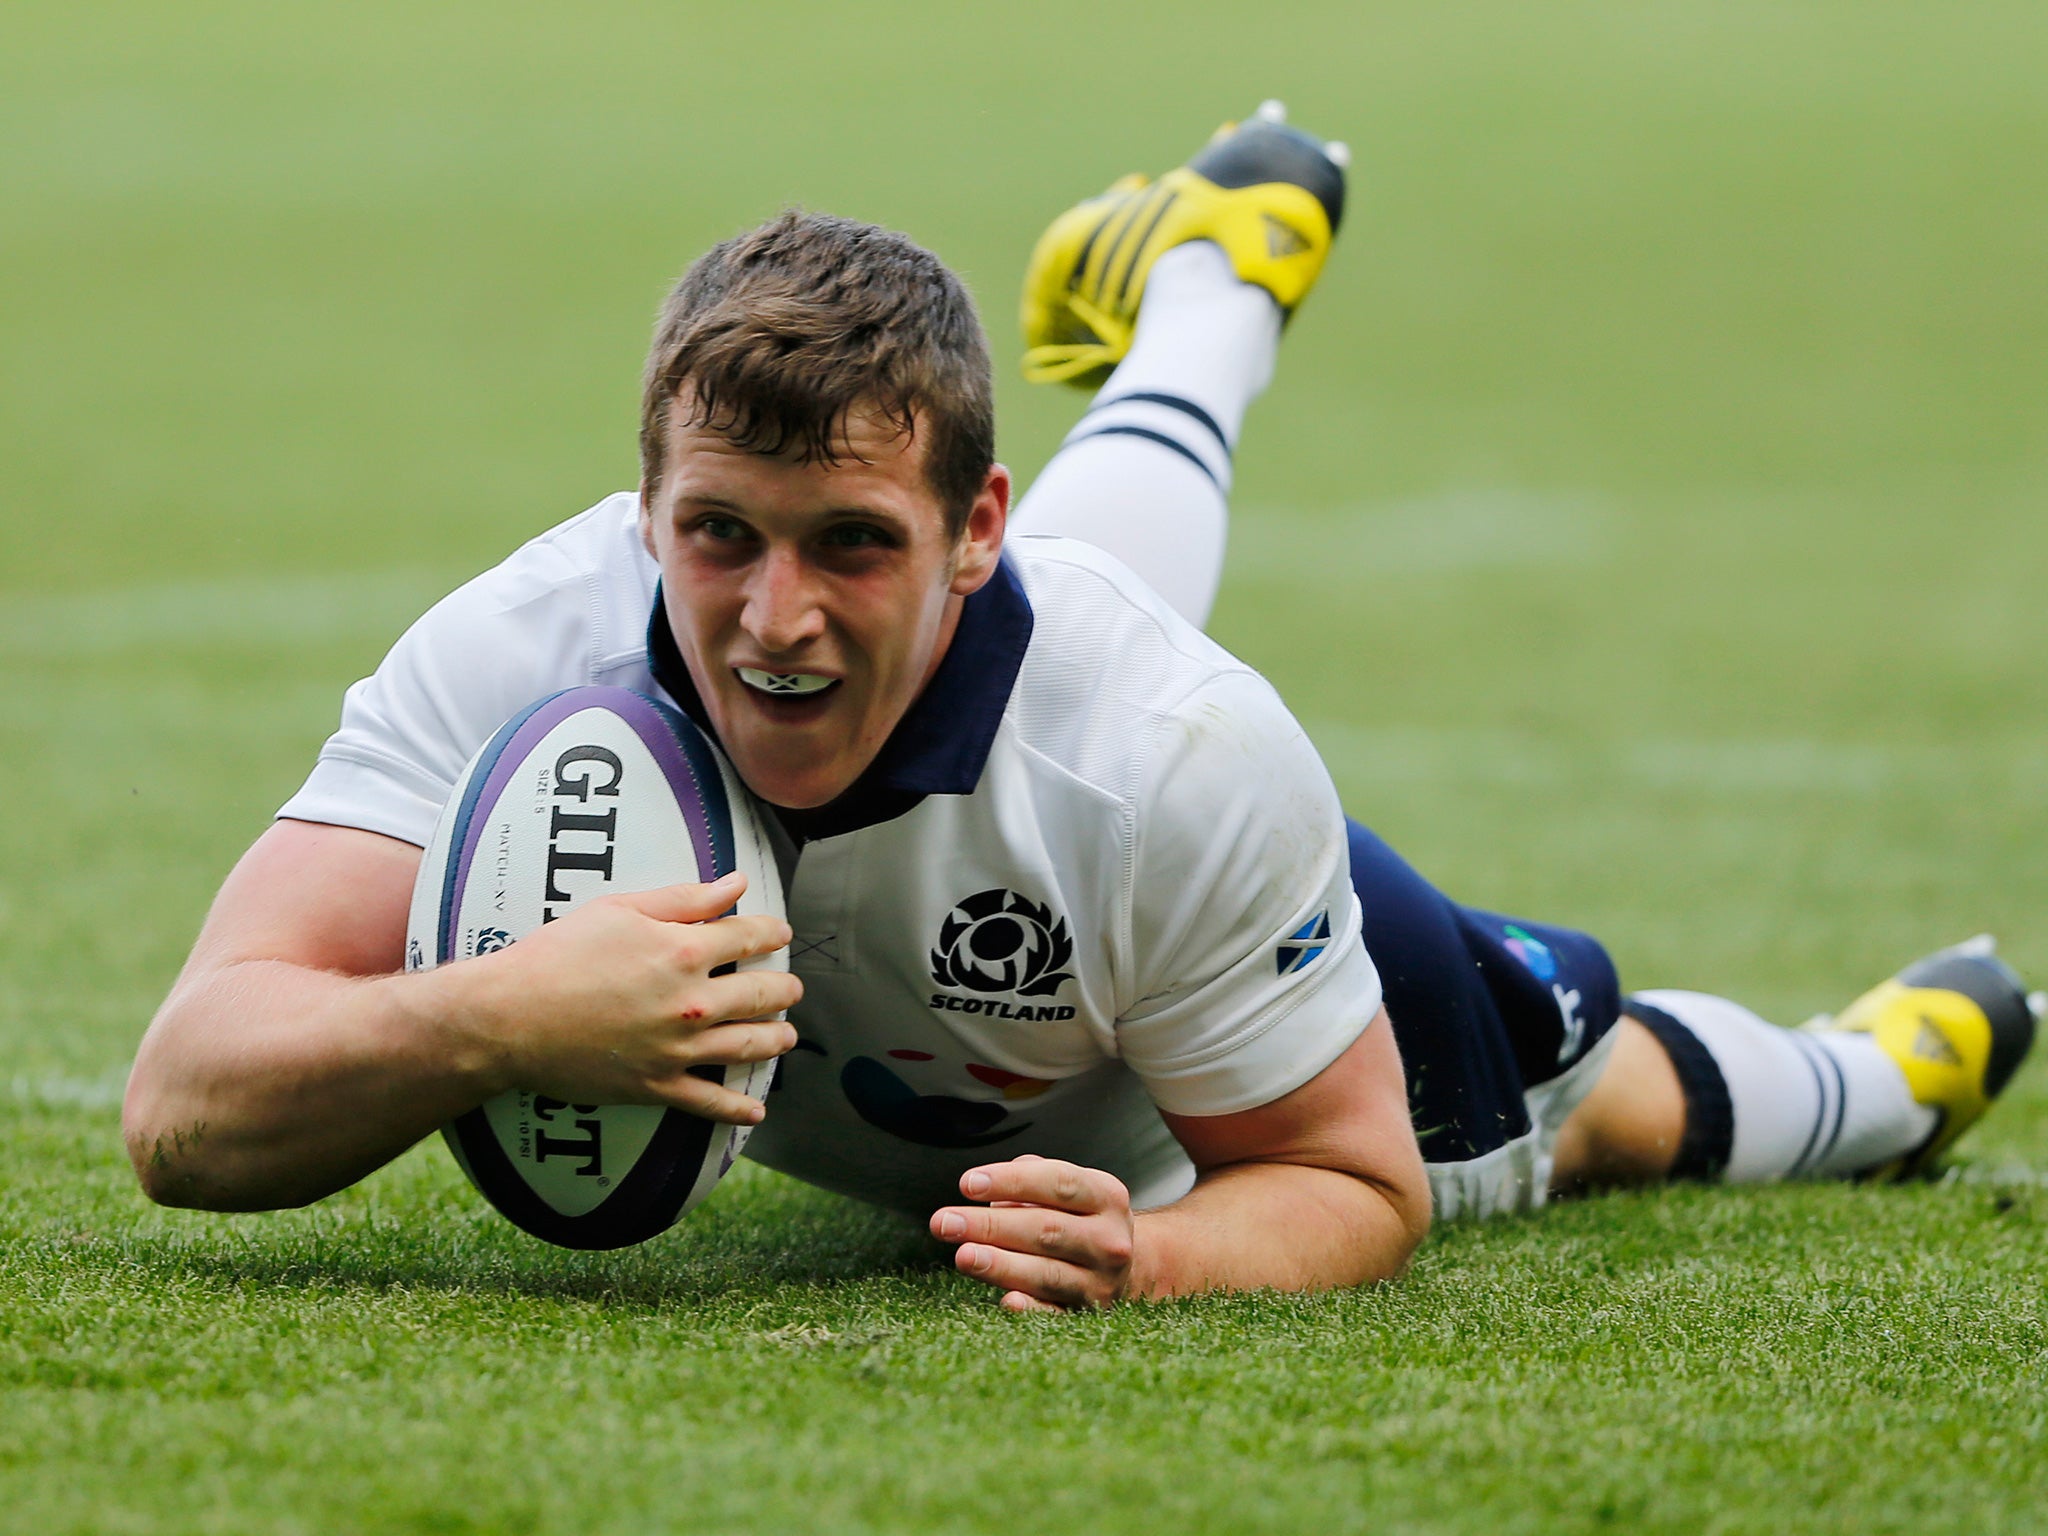 Crossing the line: Mark Bennett scores a try for Scotland against Italy at Murrayfield